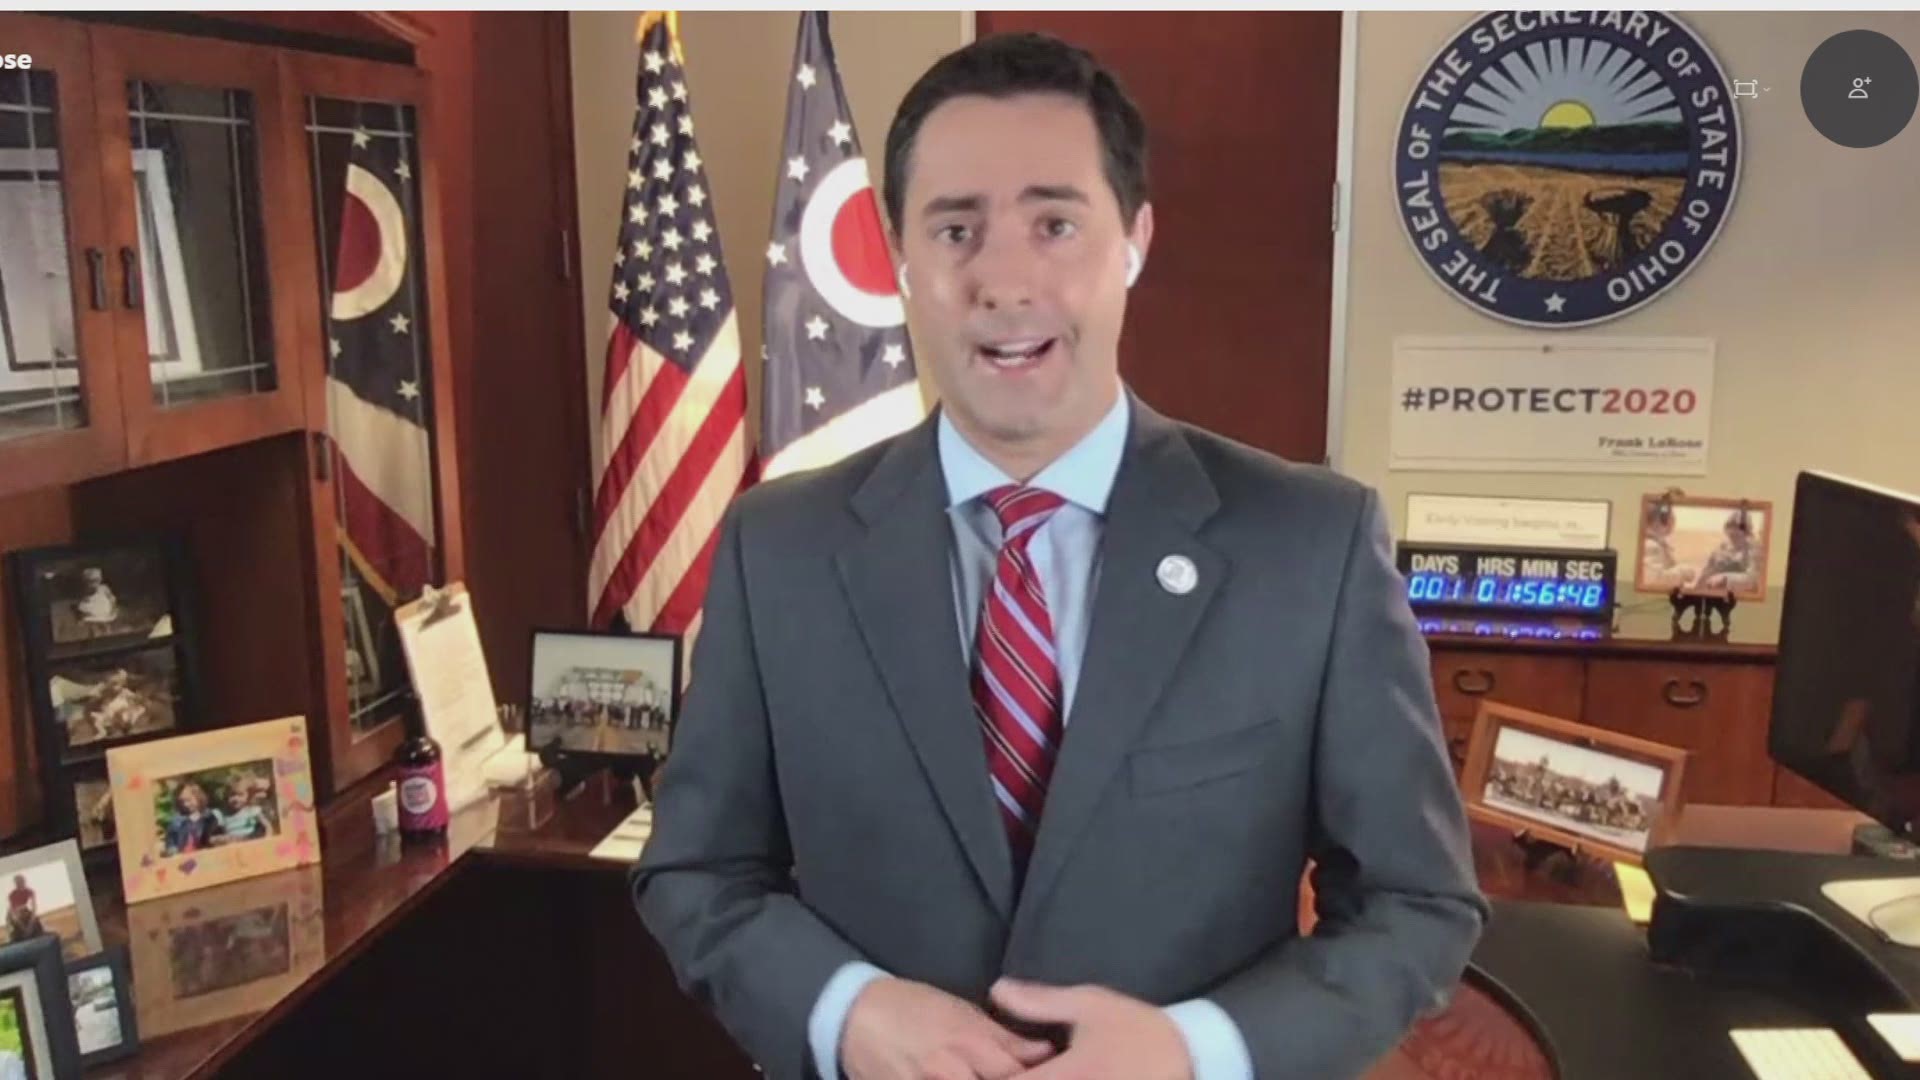 Secretary of State Frank LaRose joins us to talk about registering to vote in Ohio.